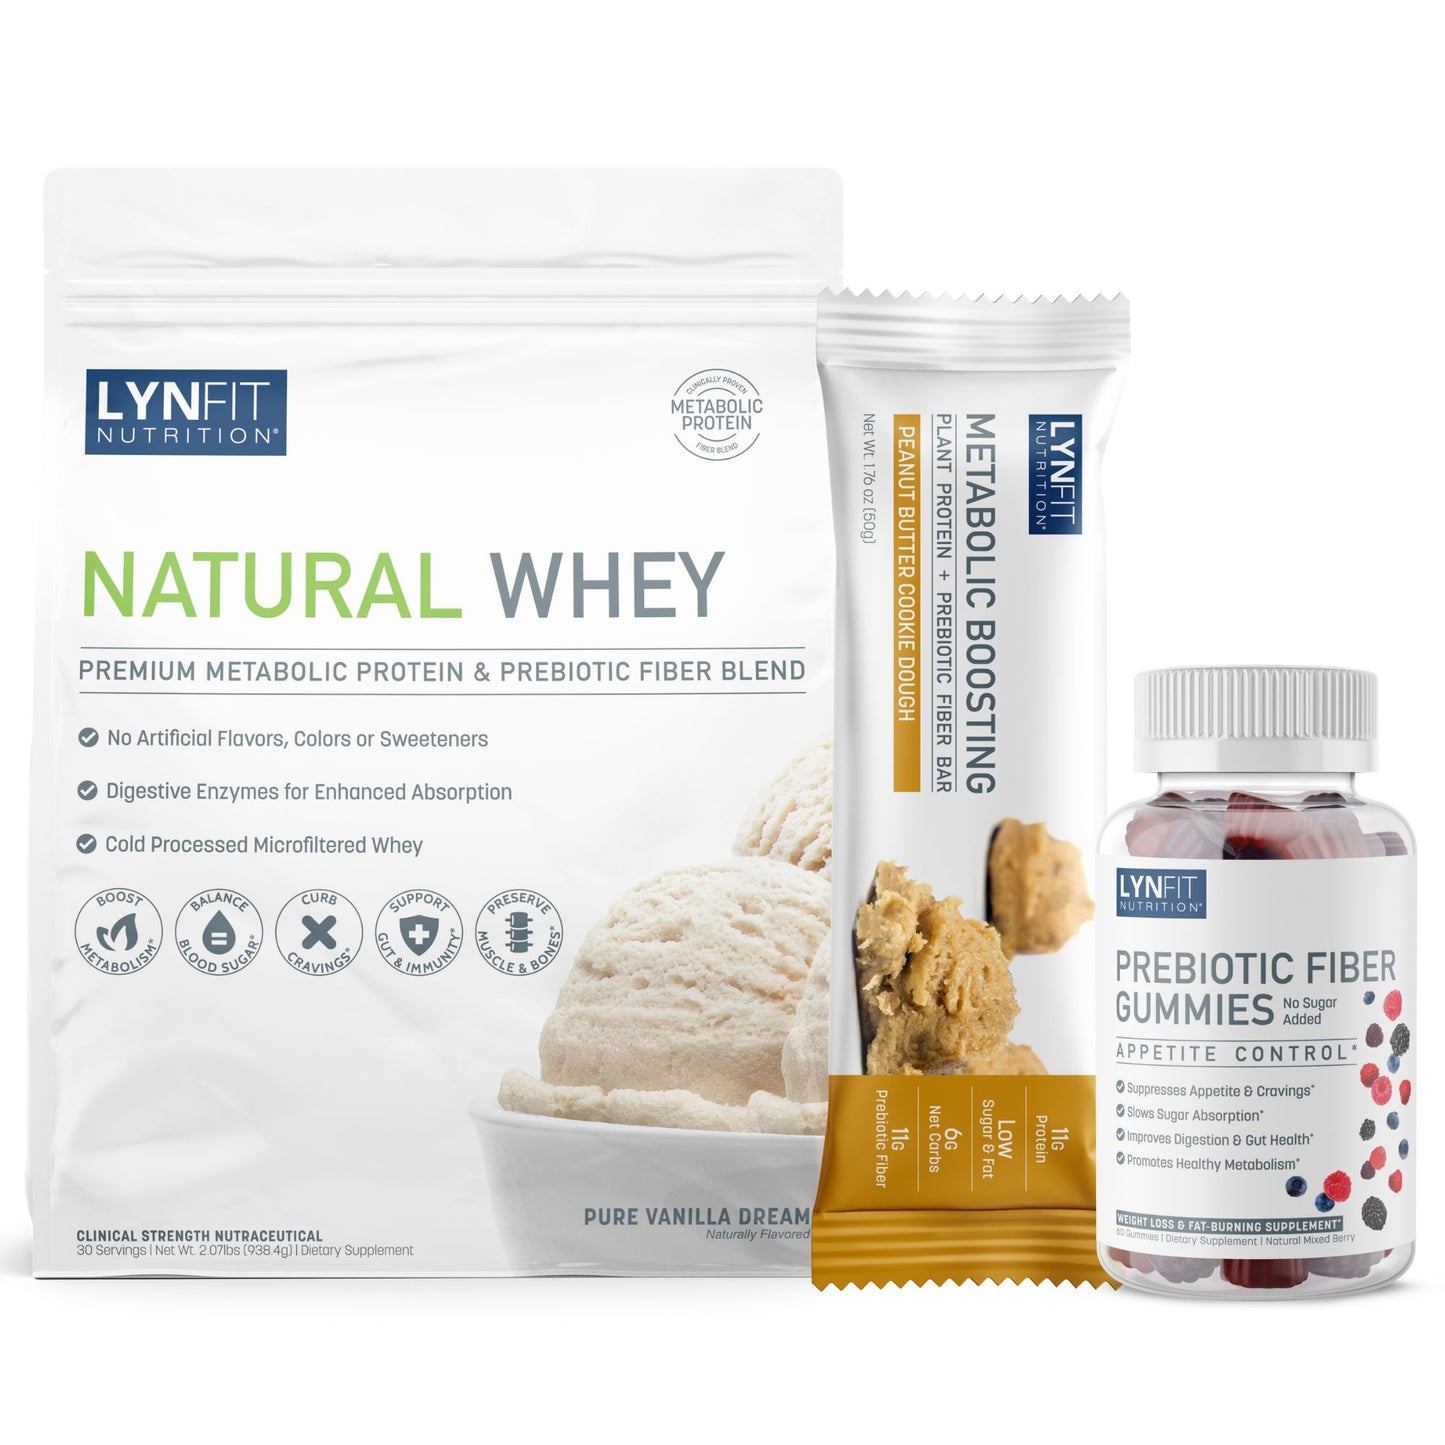 TV SPECIAL: Clean Keto Snack Stack | (1) Natural Whey Protein Powder (1) Prebiotic Fiber Gummies (12) Plant-Based Lean Bars